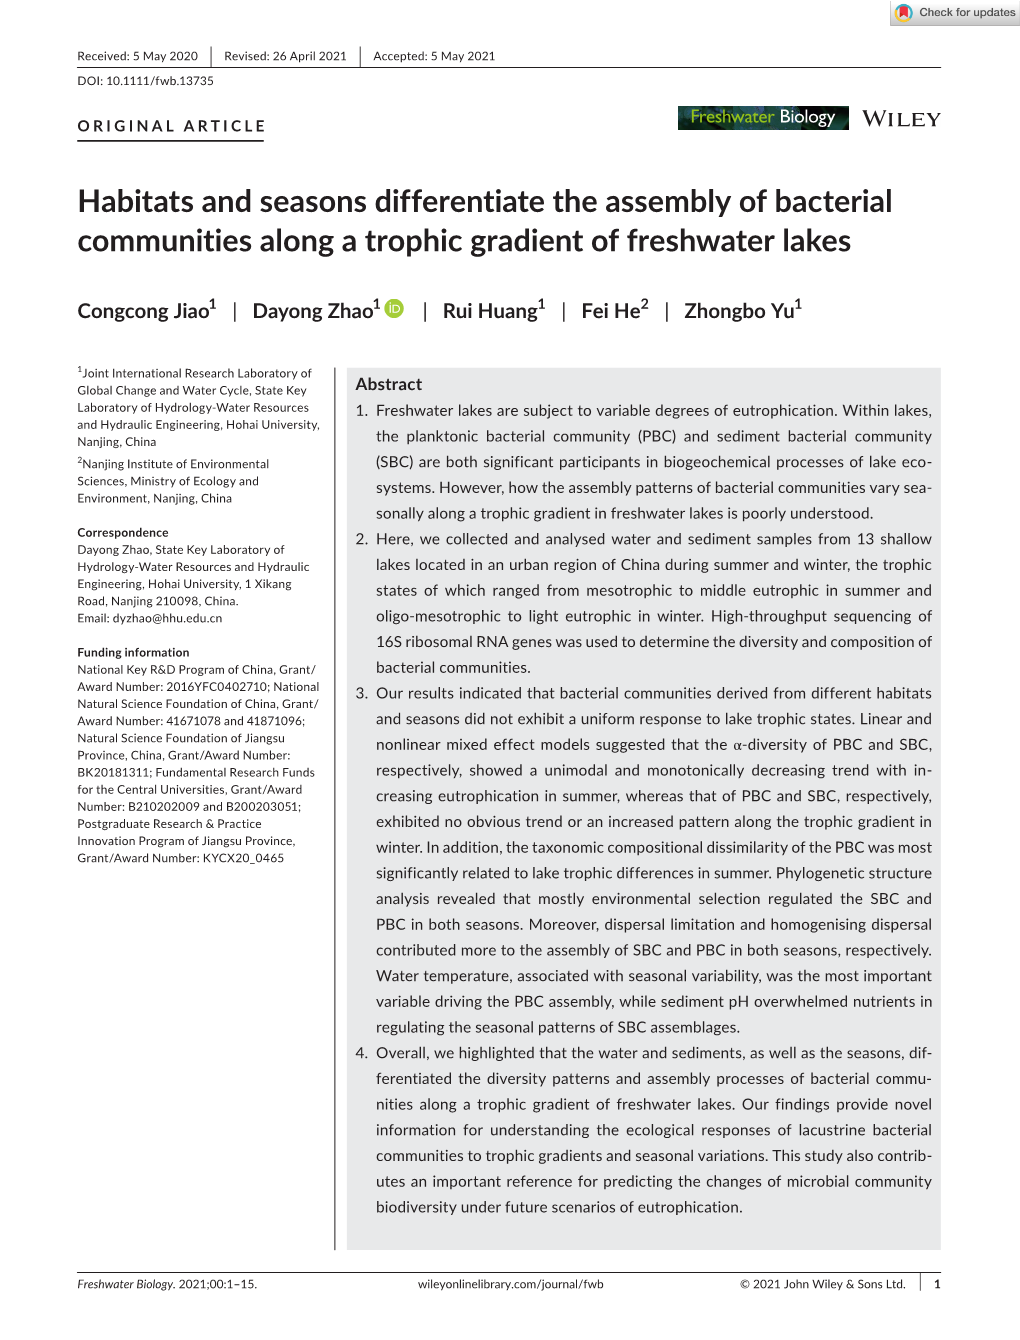 Habitats and Seasons Differentiate the Assembly of Bacterial Communities Along a Trophic Gradient of Freshwater Lakes